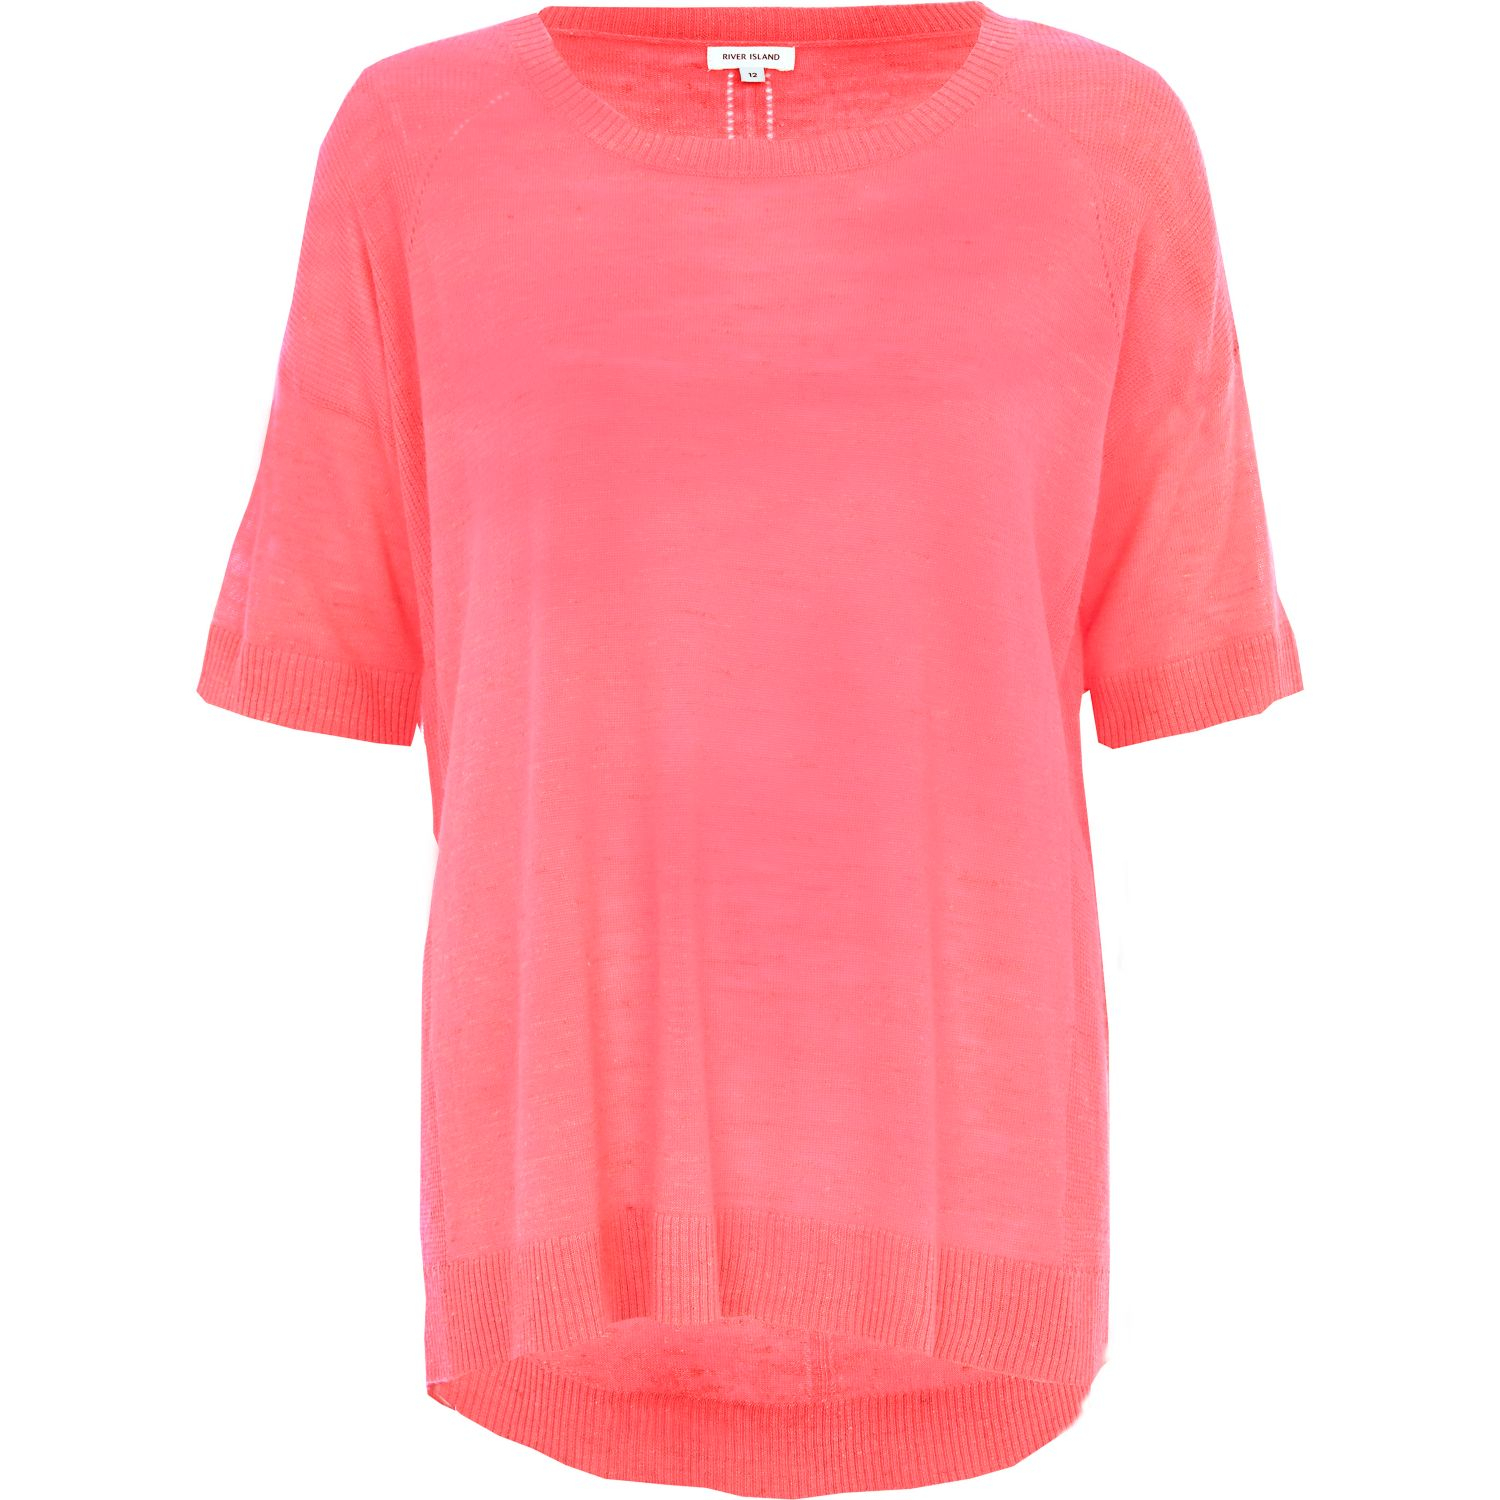 River island Bright Pink Short Sleeve Slouchy Sweater in Pink | Lyst